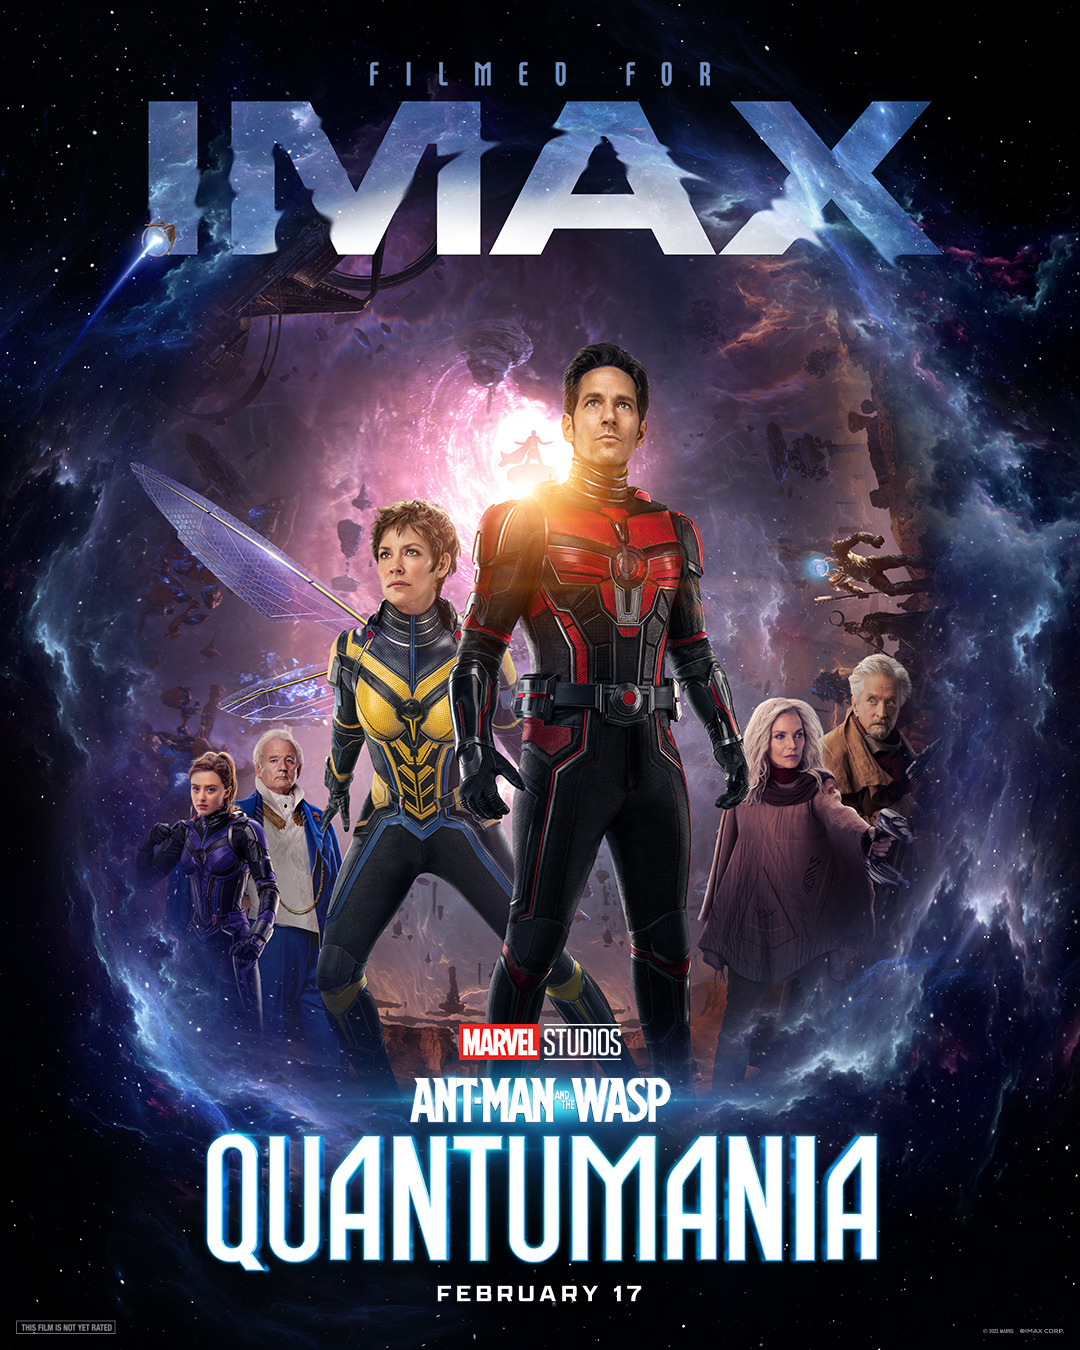 Extra Large Movie Poster Image for Ant-Man and the Wasp: Quantumania (#11 of 27)